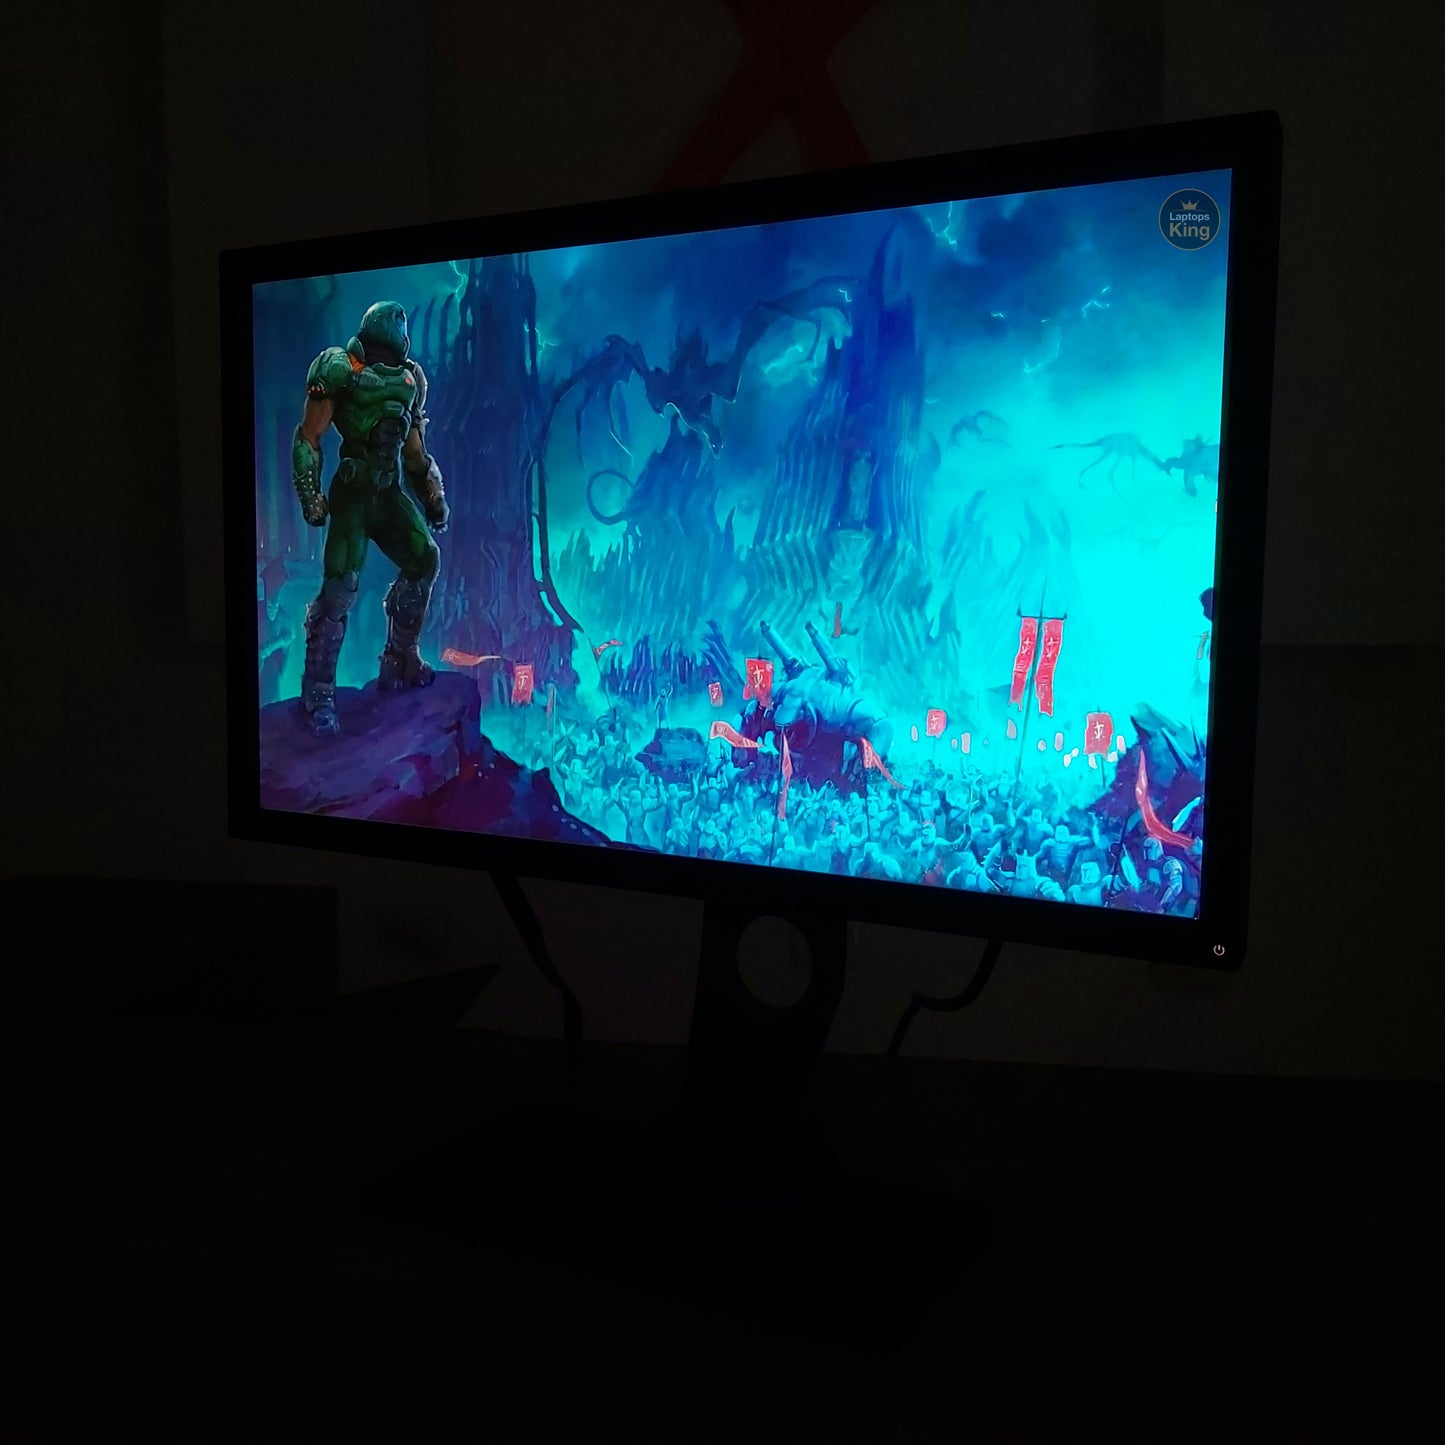 BenQ Xl2430t 24" Fhd 144hz Gaming Monitor (Used Very Clean)